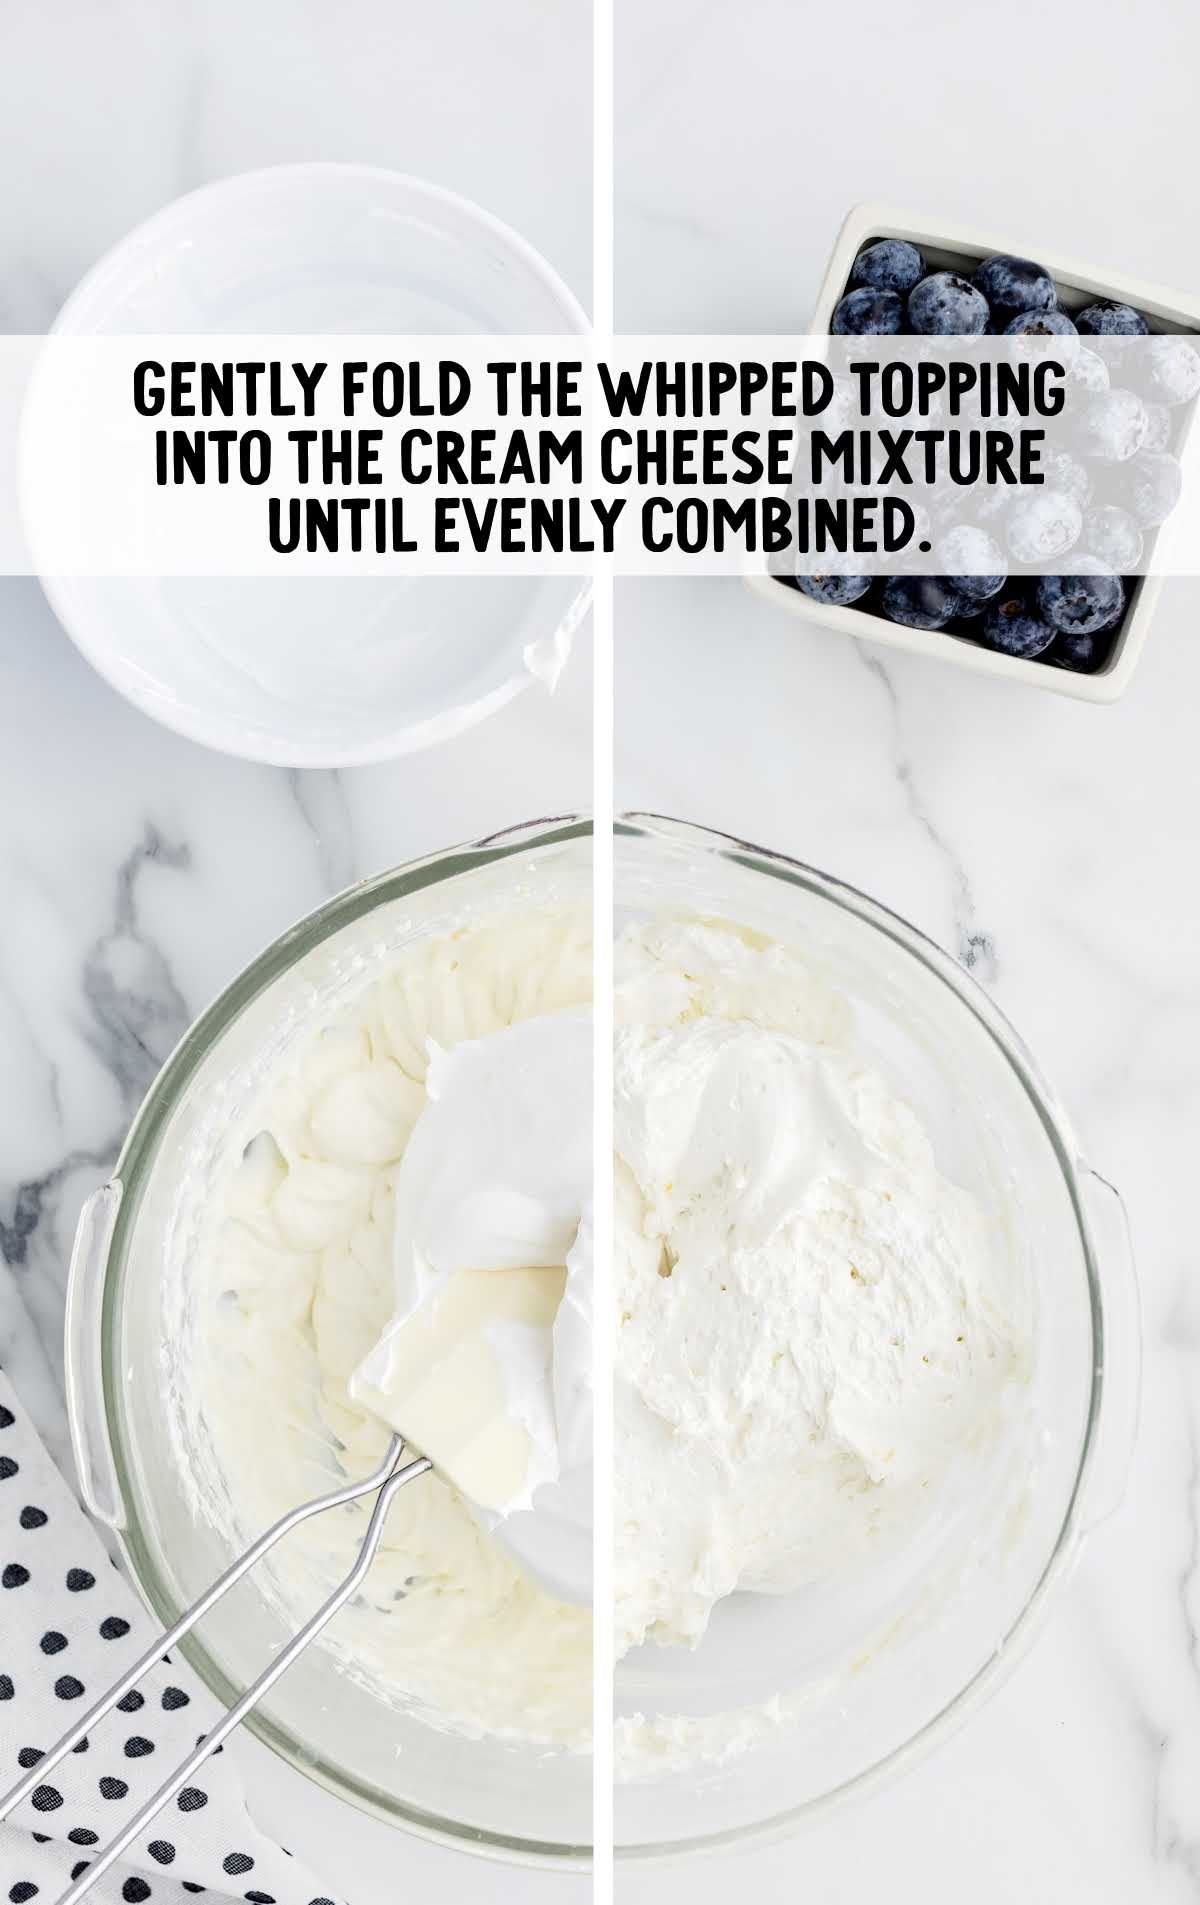 whipped topping folded into the cream cheese mixture in a bowl